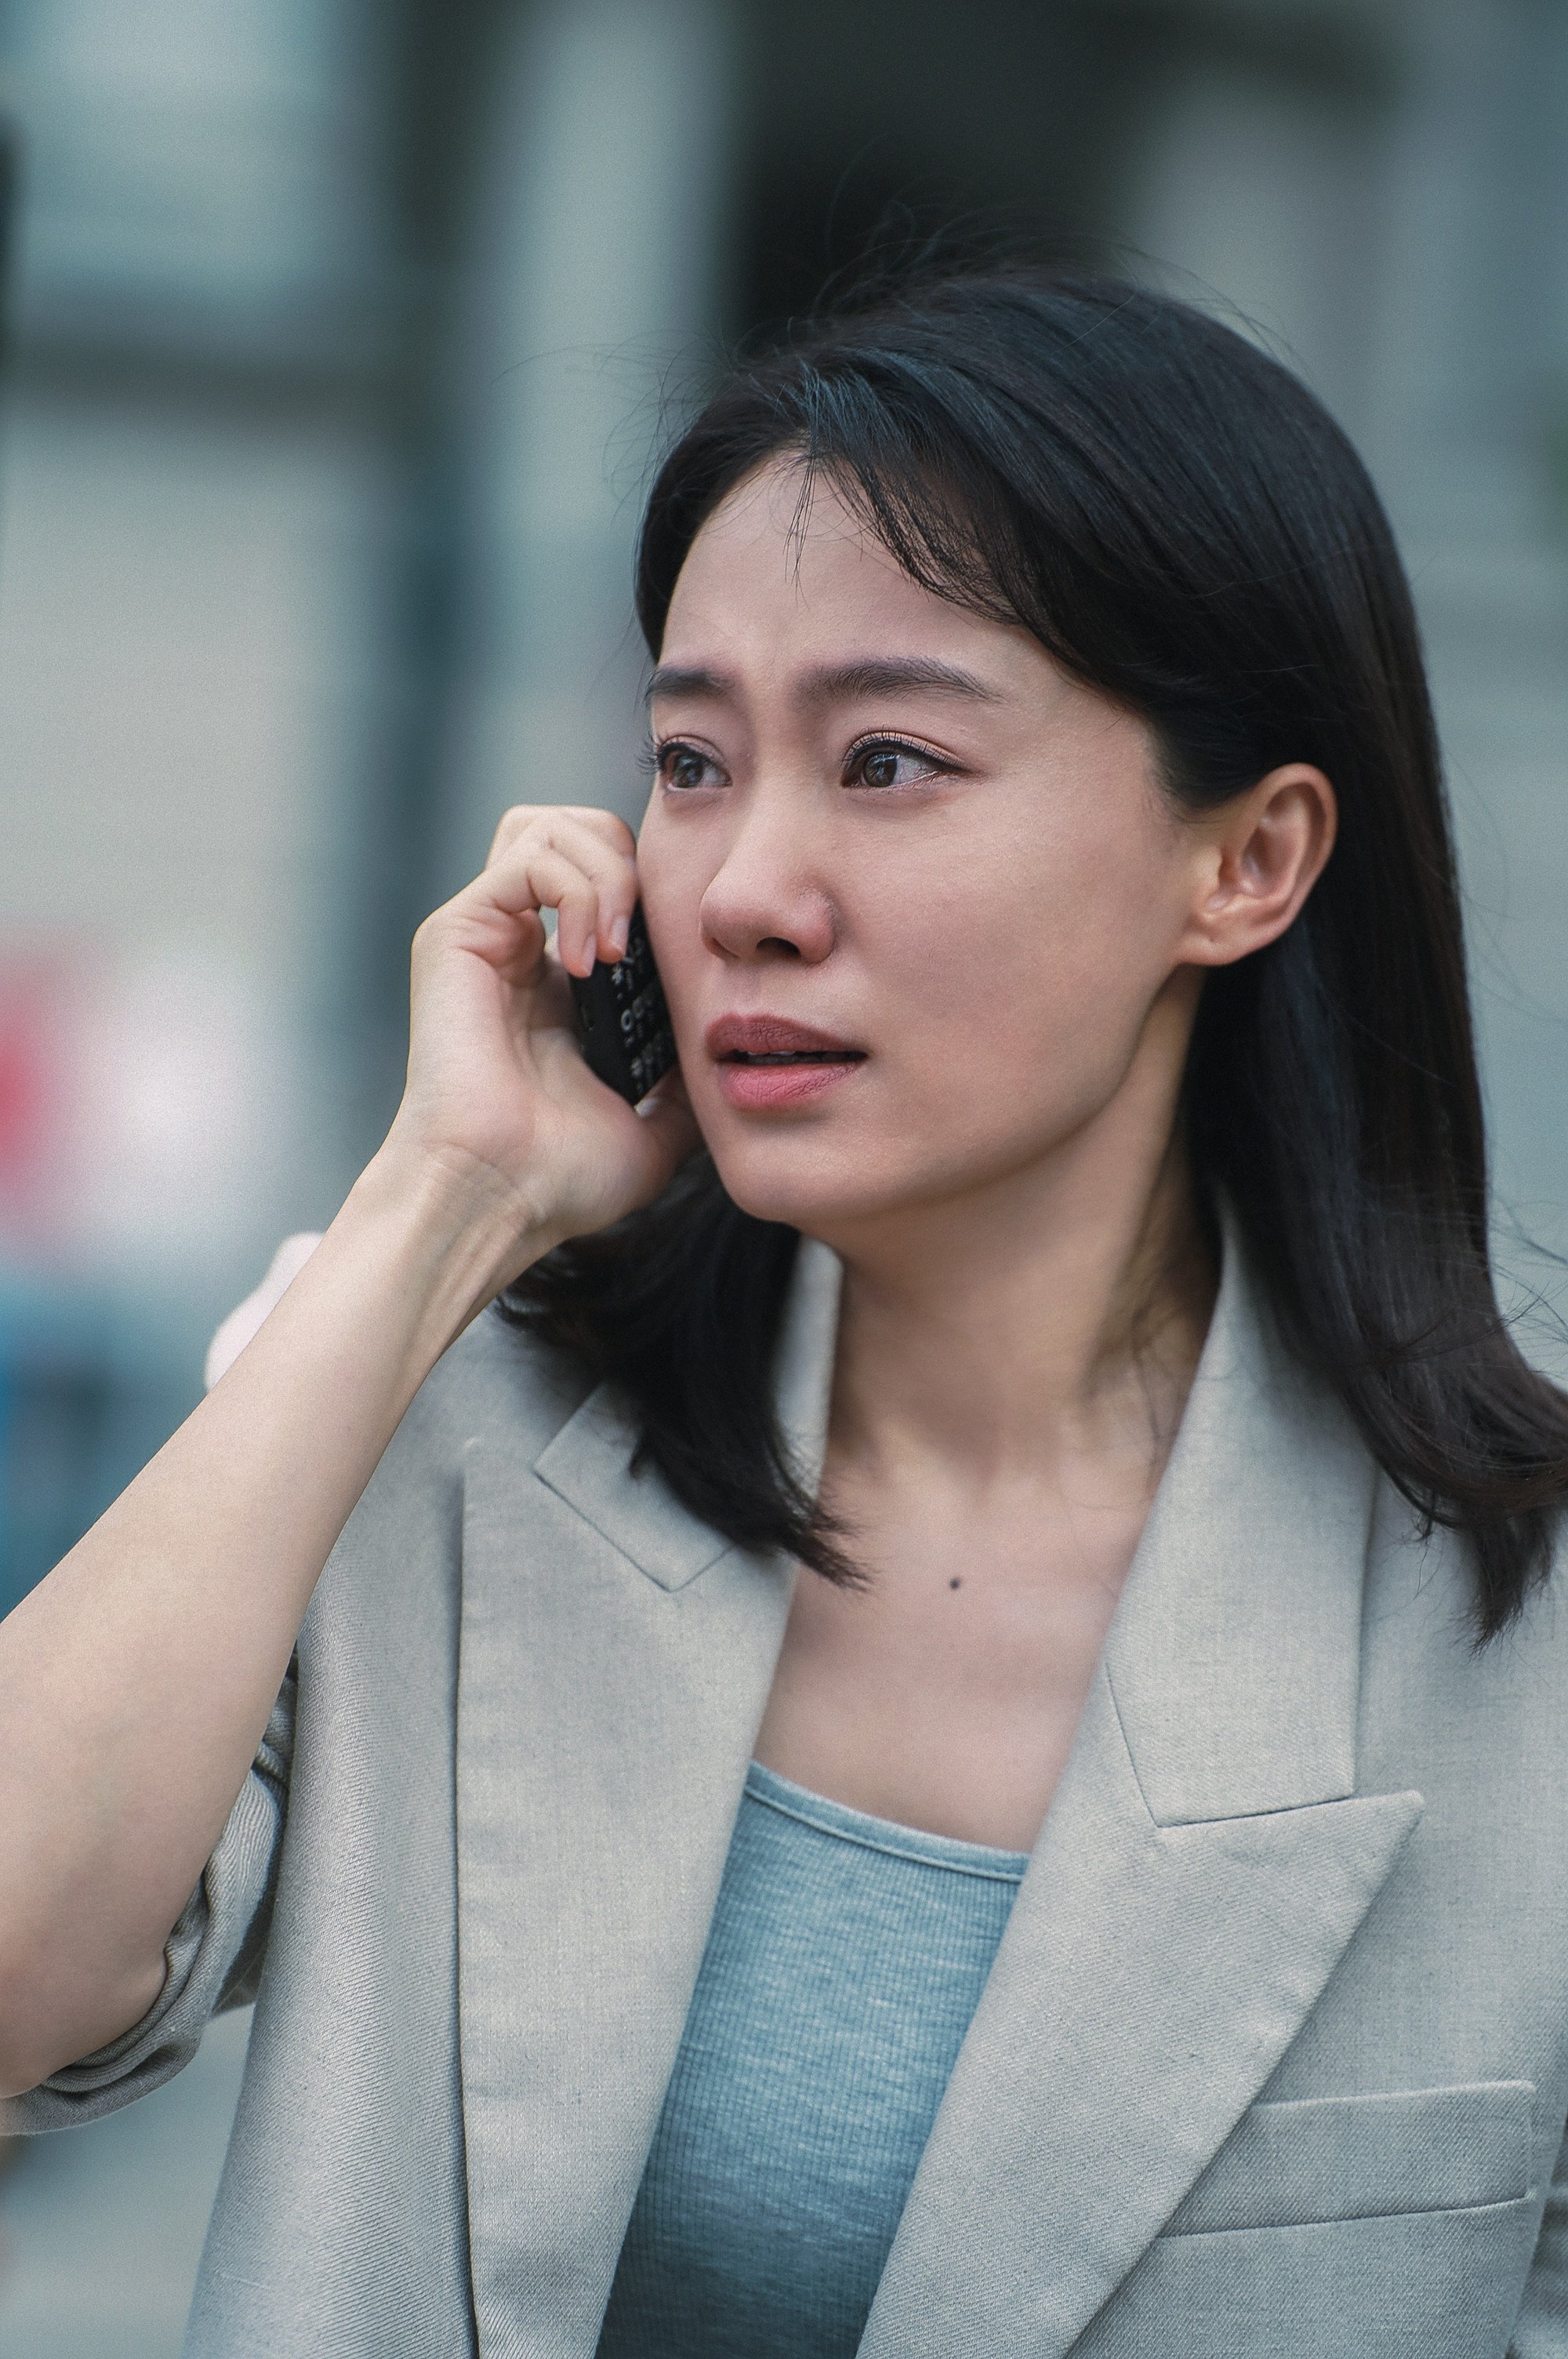 Zhang Xiaofei as high-flying lawyer Vicky Chen in a still from “Last Suspect” (category IIB, Mandarin) directed by Zhang Mo. Lee Hong-chi co-stars.

